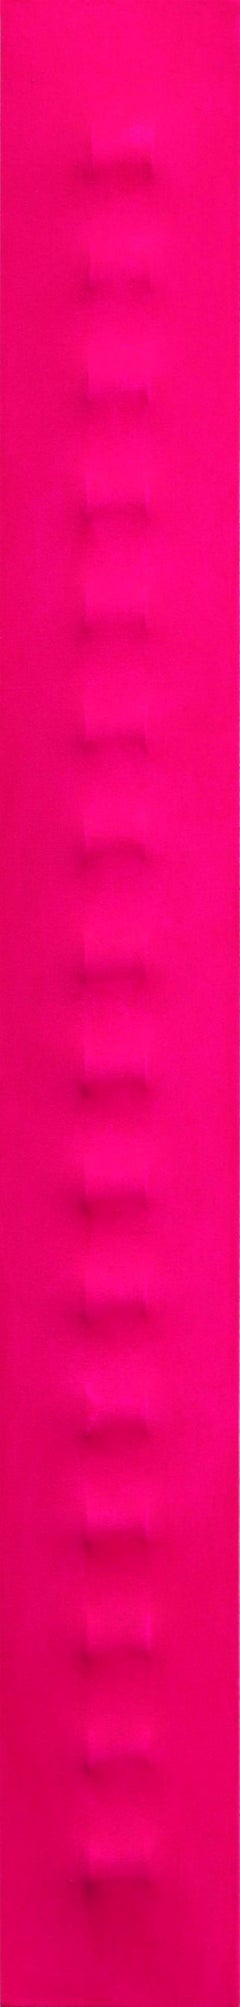 Slims CNP - Three-dimensional Minimalist Pink Abstract Painting